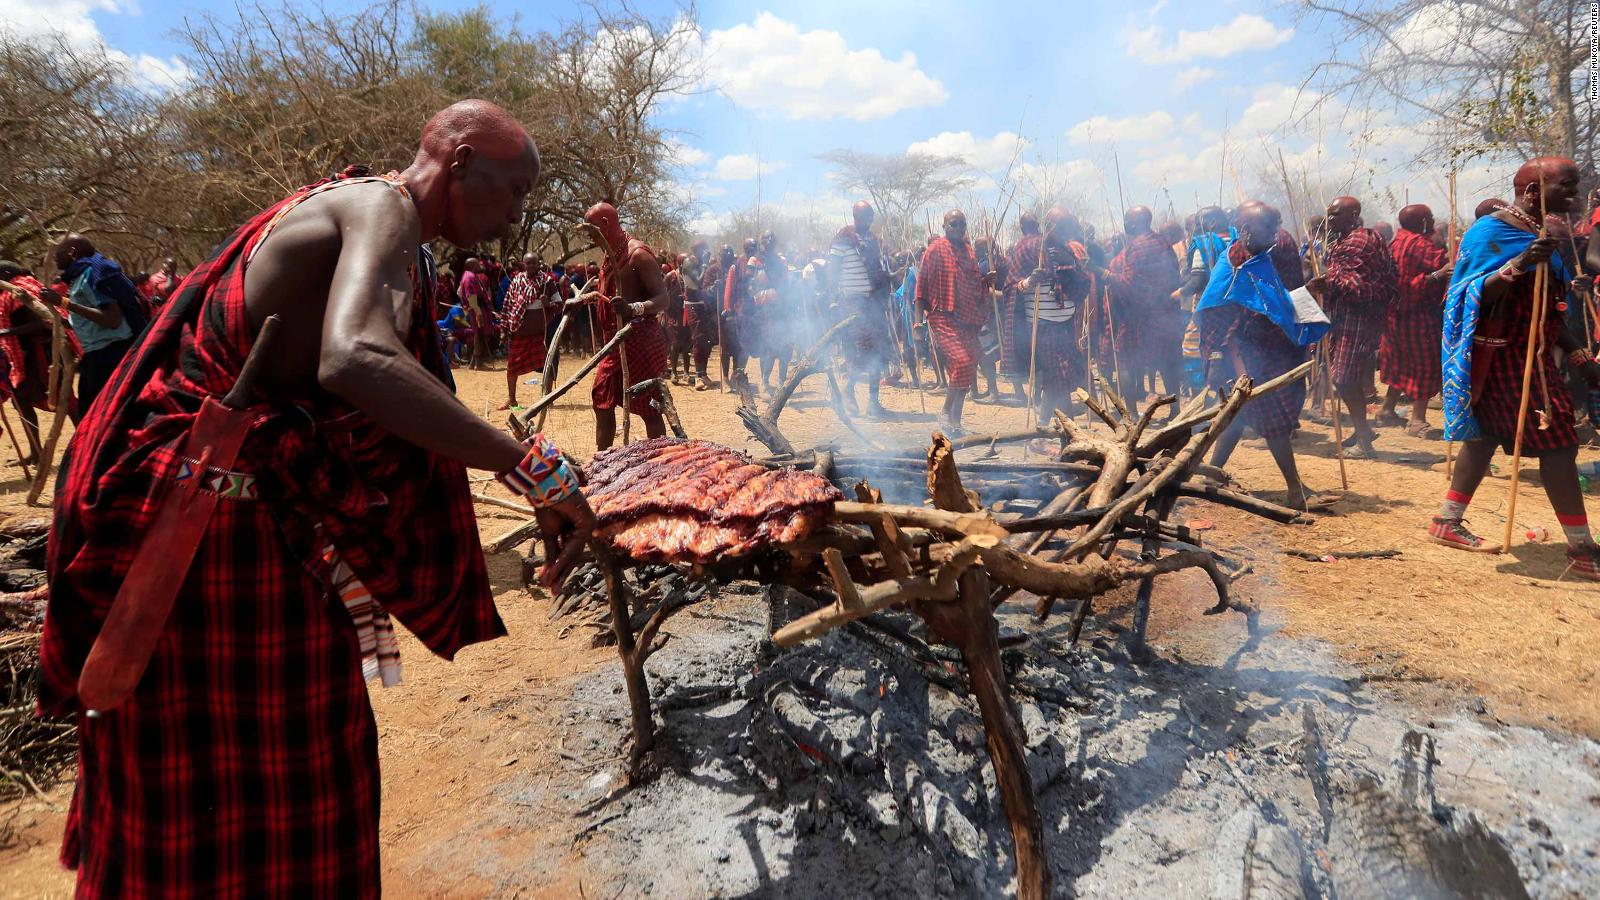 Kenya's Maasai gather for onceinadecade ceremony to turn warriors